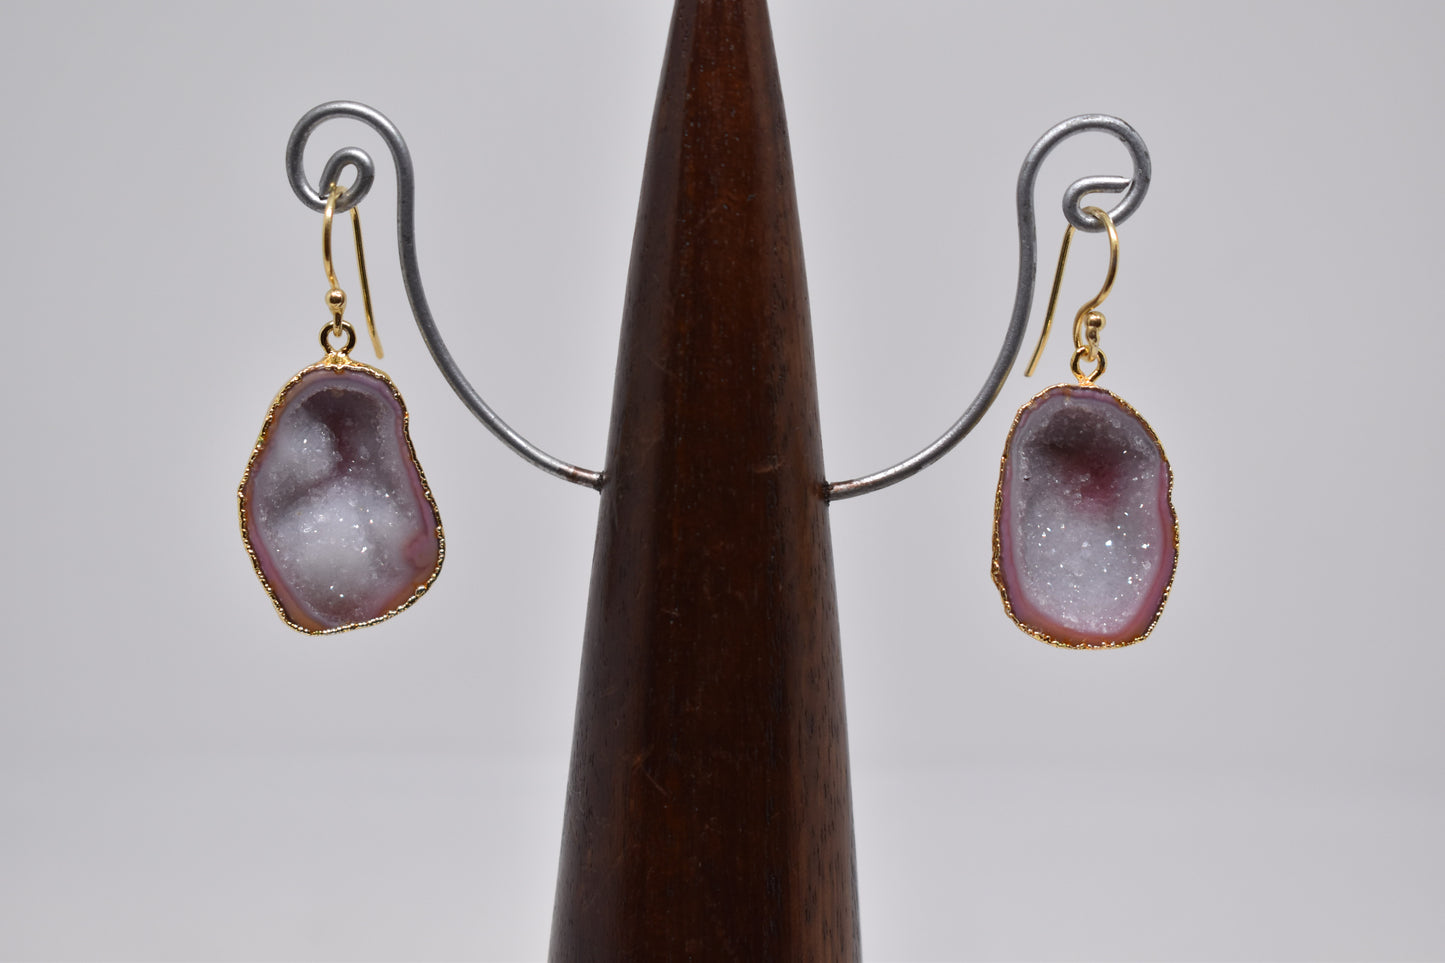 Geode Druzy Earrings available in a variety of fabulous colours